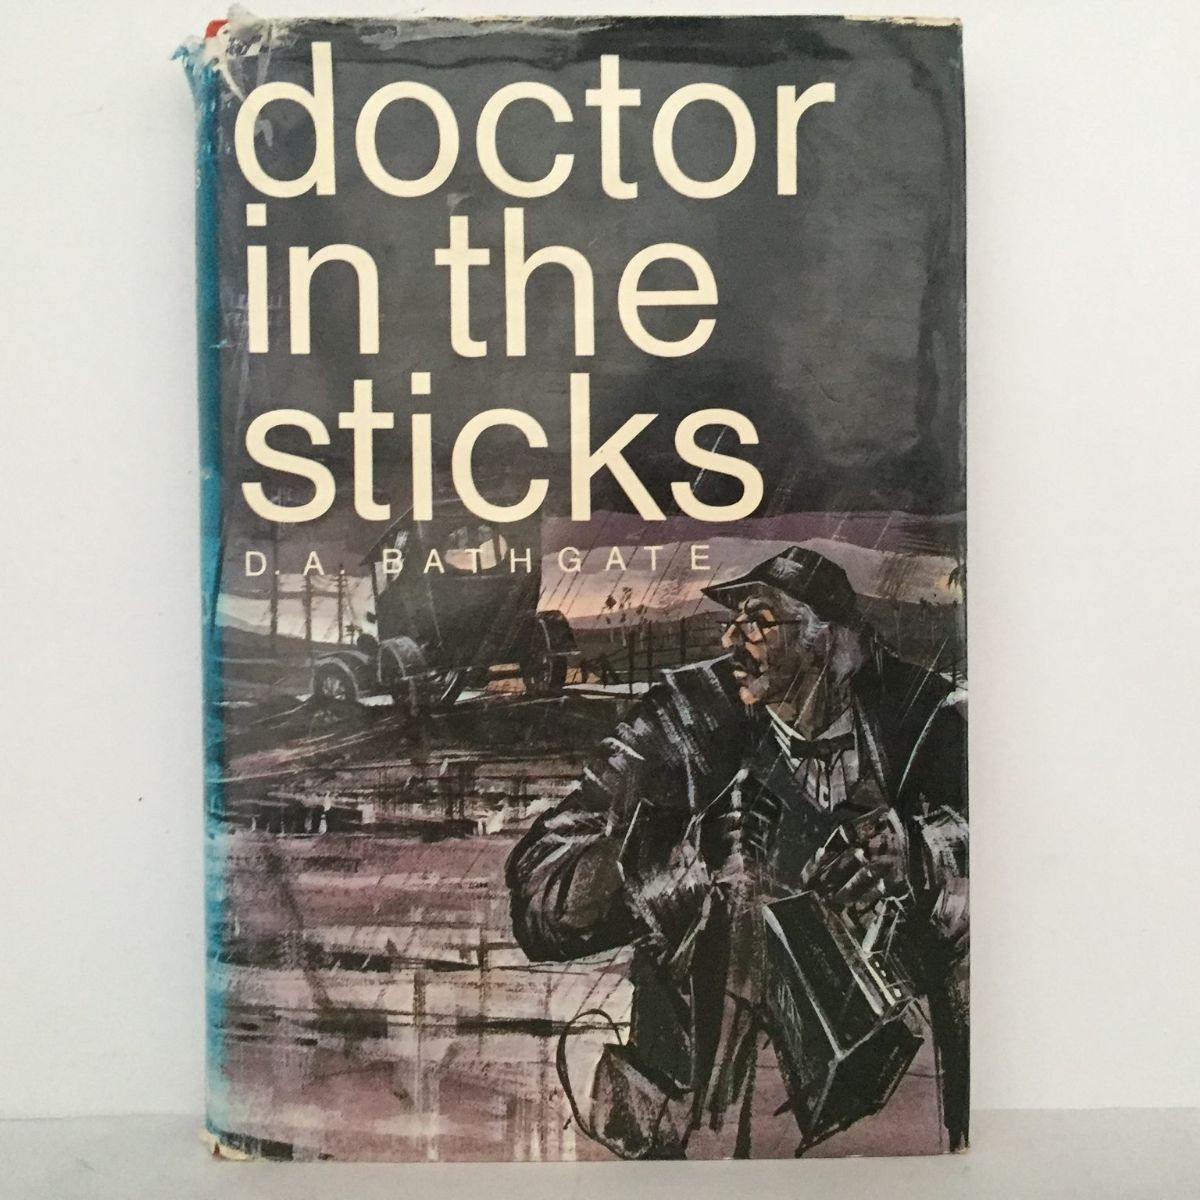 DOCTOR IN THE STICKS